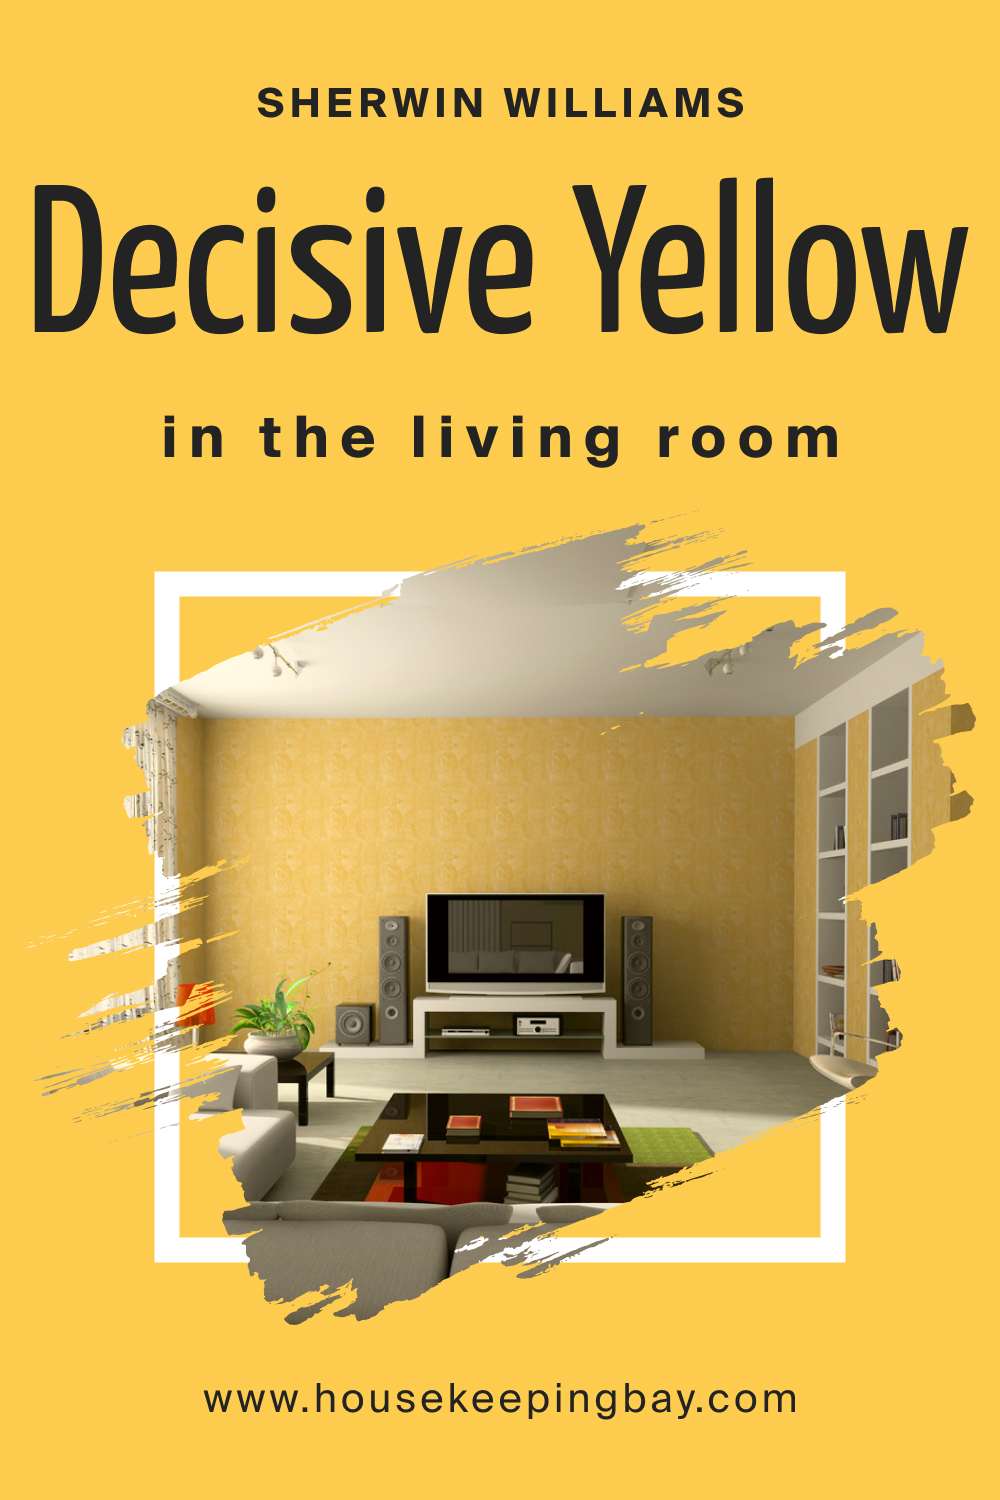 Sherwin Williams. Decisive Yellow SW 6902 In the Living Room